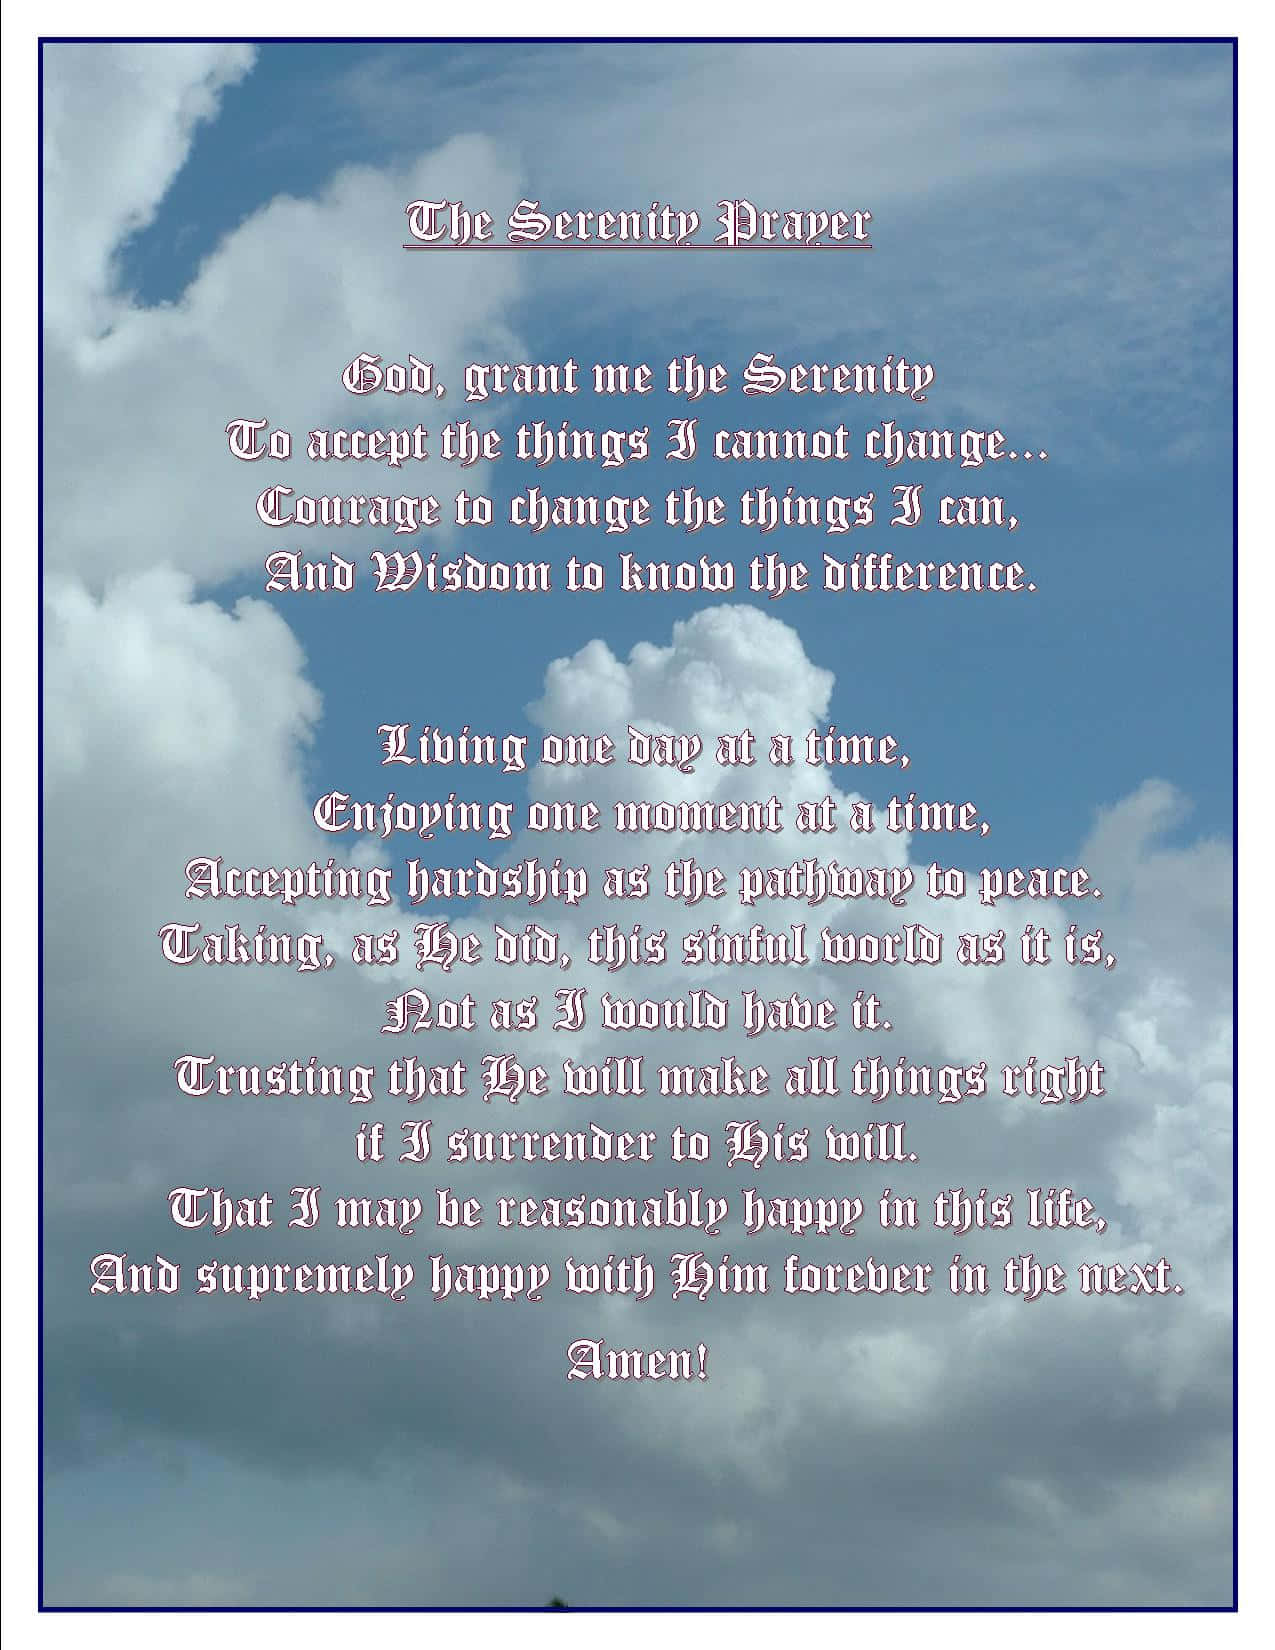 Clouds With The Blue Skies Serenity Prayer Background